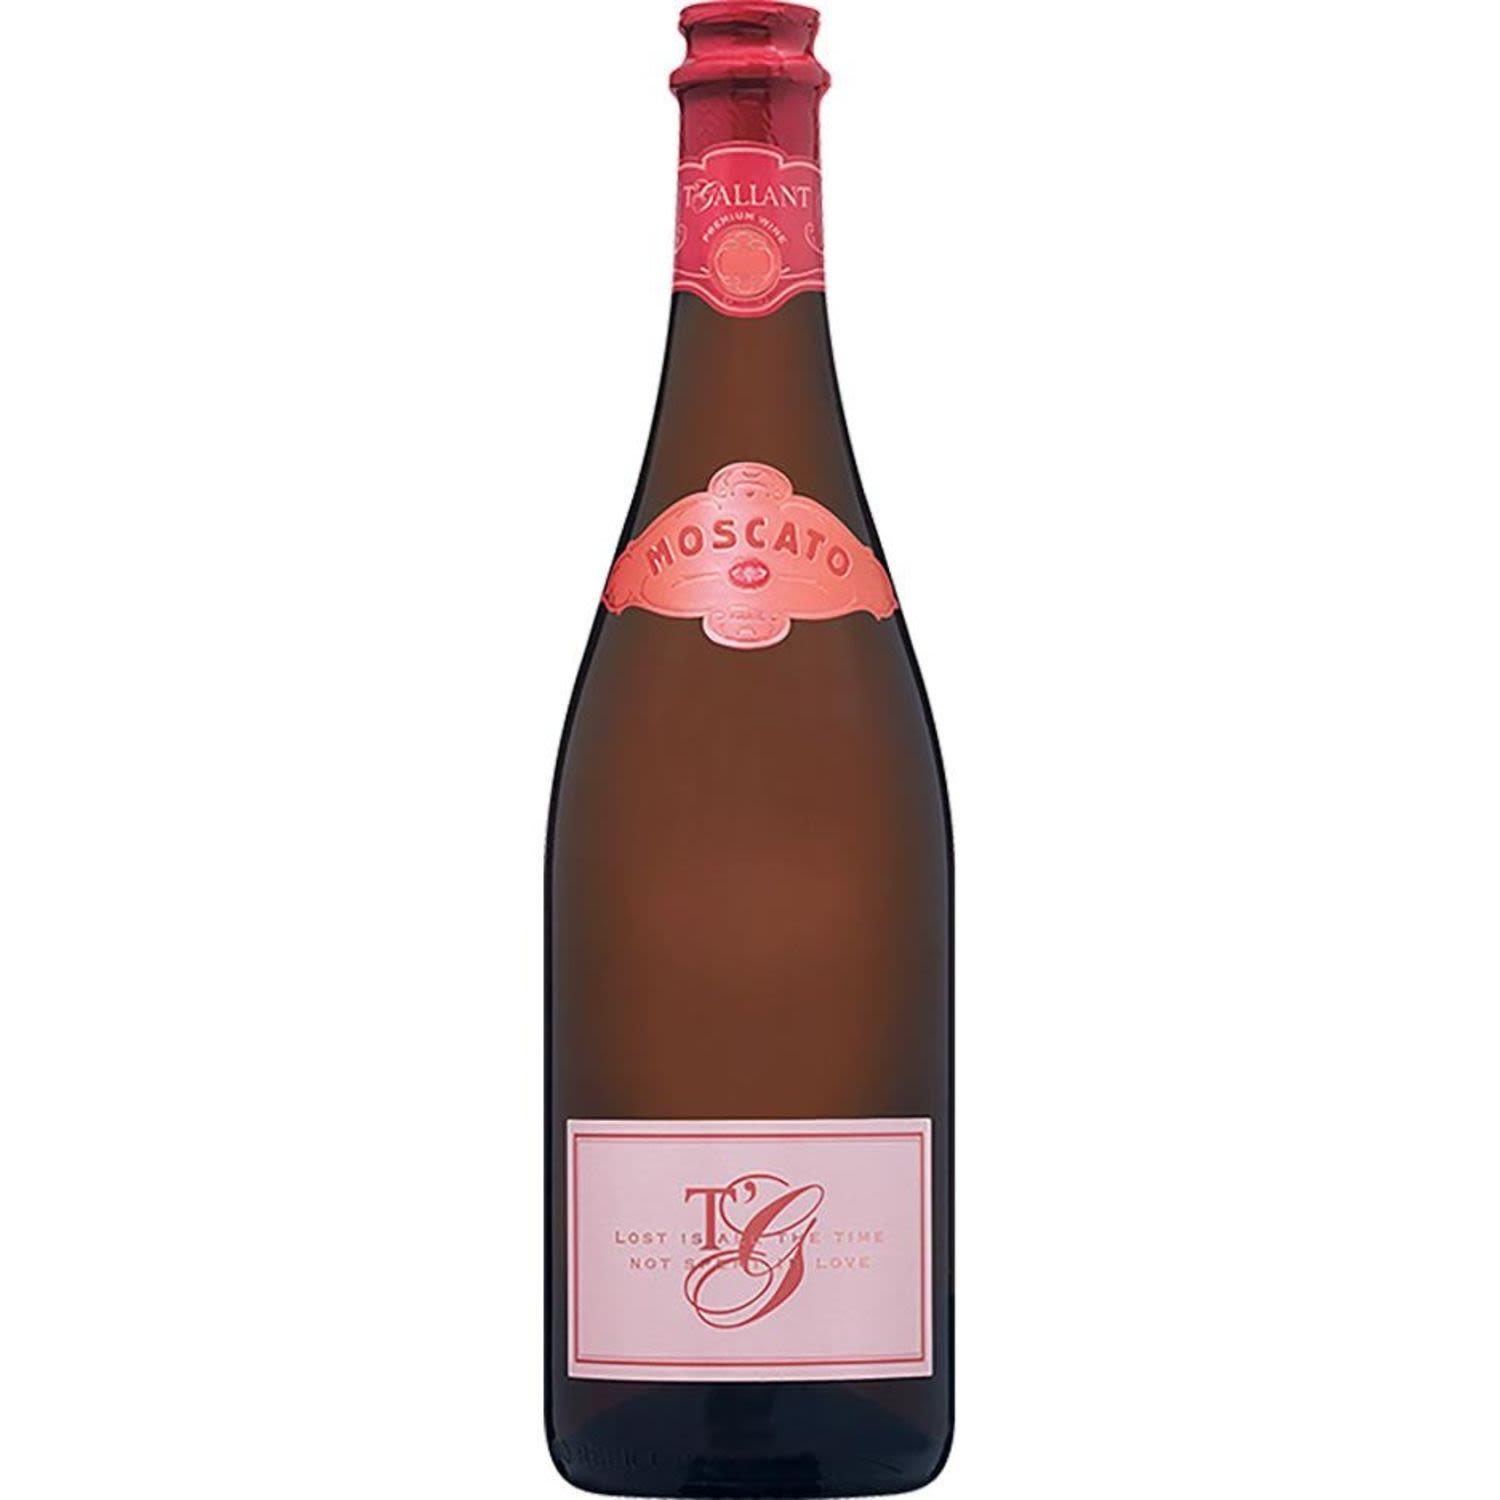 T'Gallant Crown Seal Pink Moscato NV 750mL Bottle